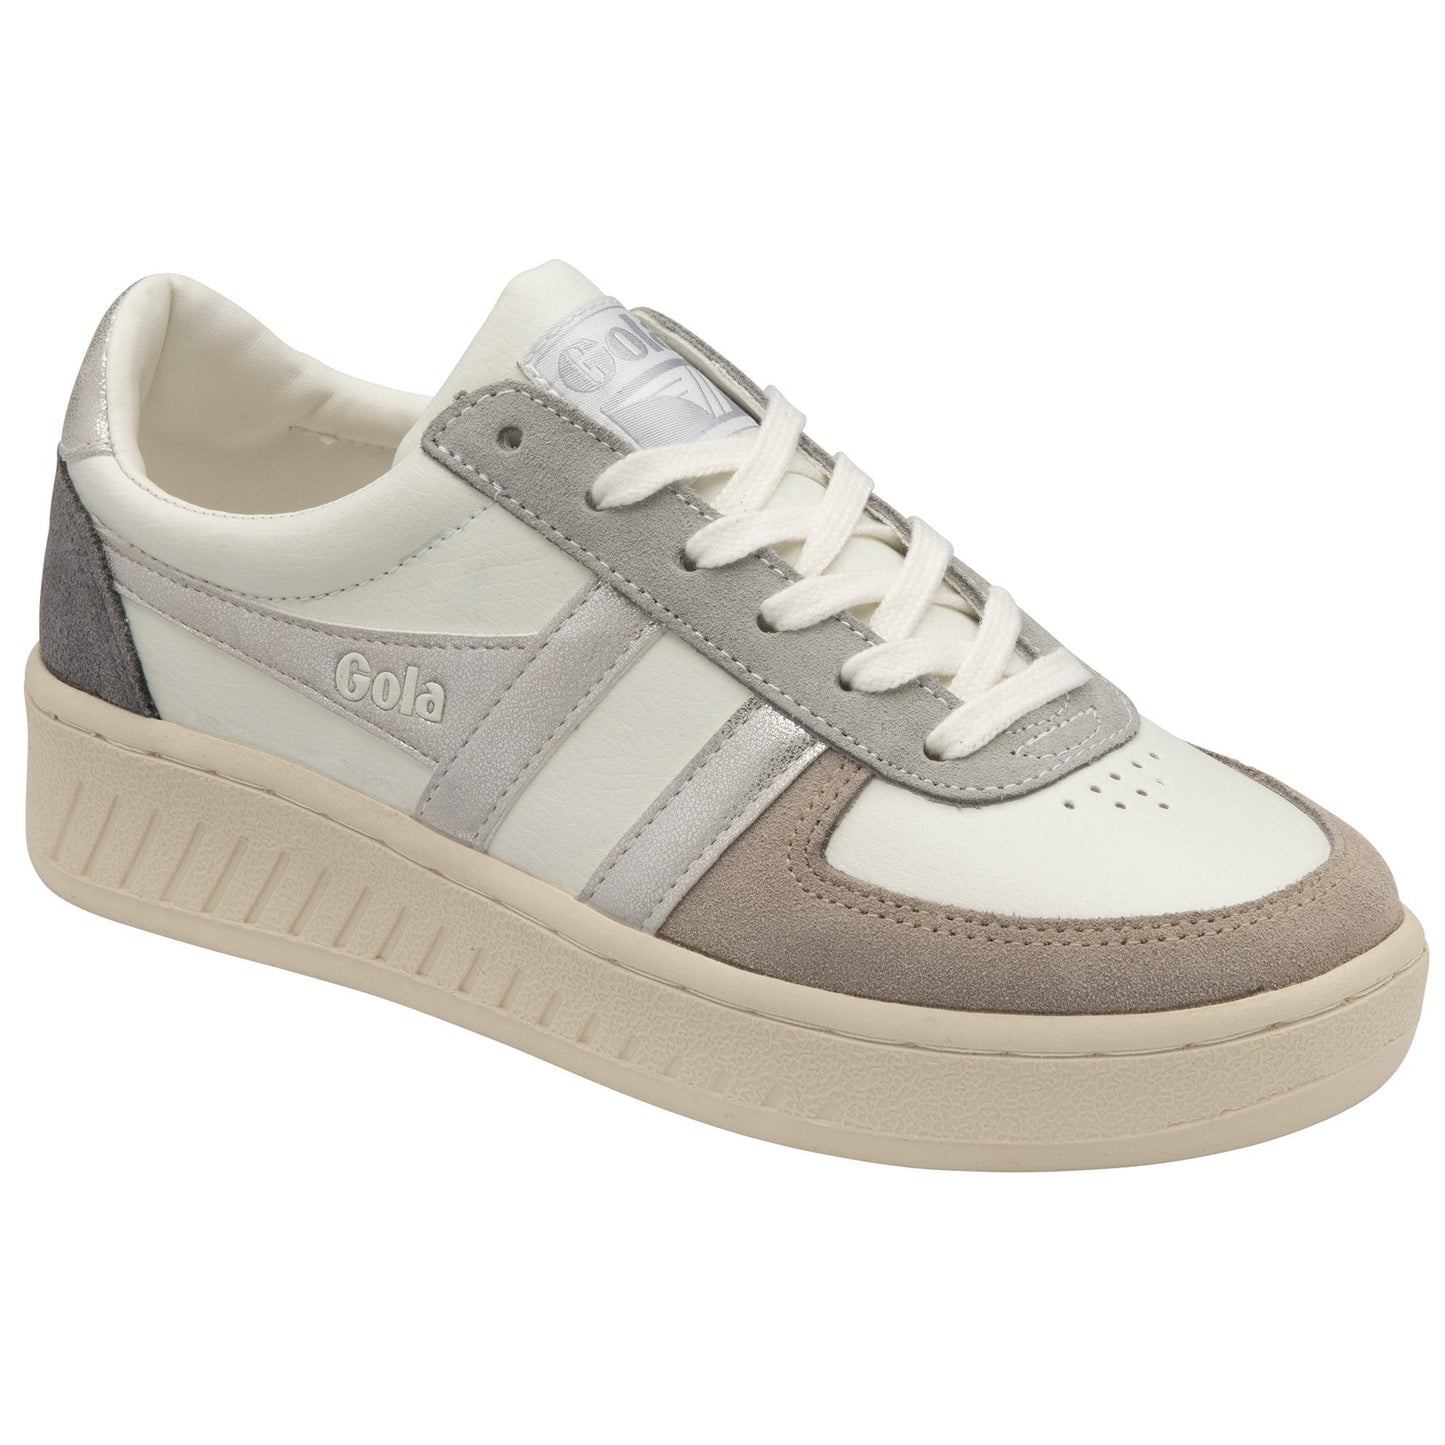 Gola Grandslam Quad O Low Top White/Feather Grey/Silver/Ash